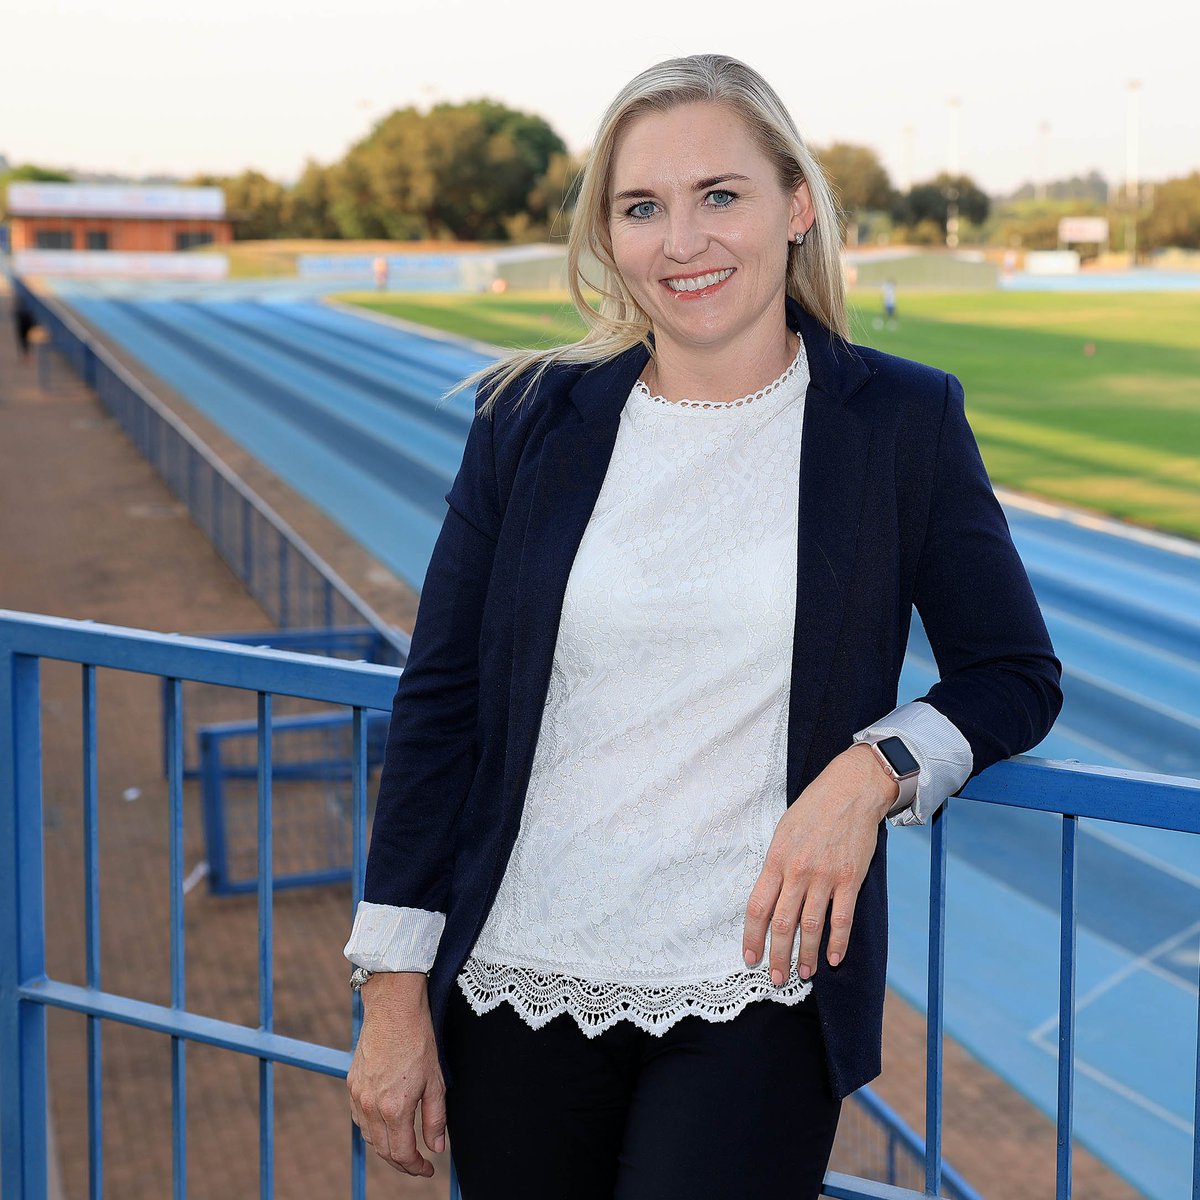 #HighPerformanceCentre: #ProudlyUP

Nicola Macleod is the newly appointed Deputy Director of Coaching & Performance Management at #TuksSport.

🗣️ '...the nerves are settling...I am now looking forward to being a part of this great team,'

[Photo credit: #regcaldecott]